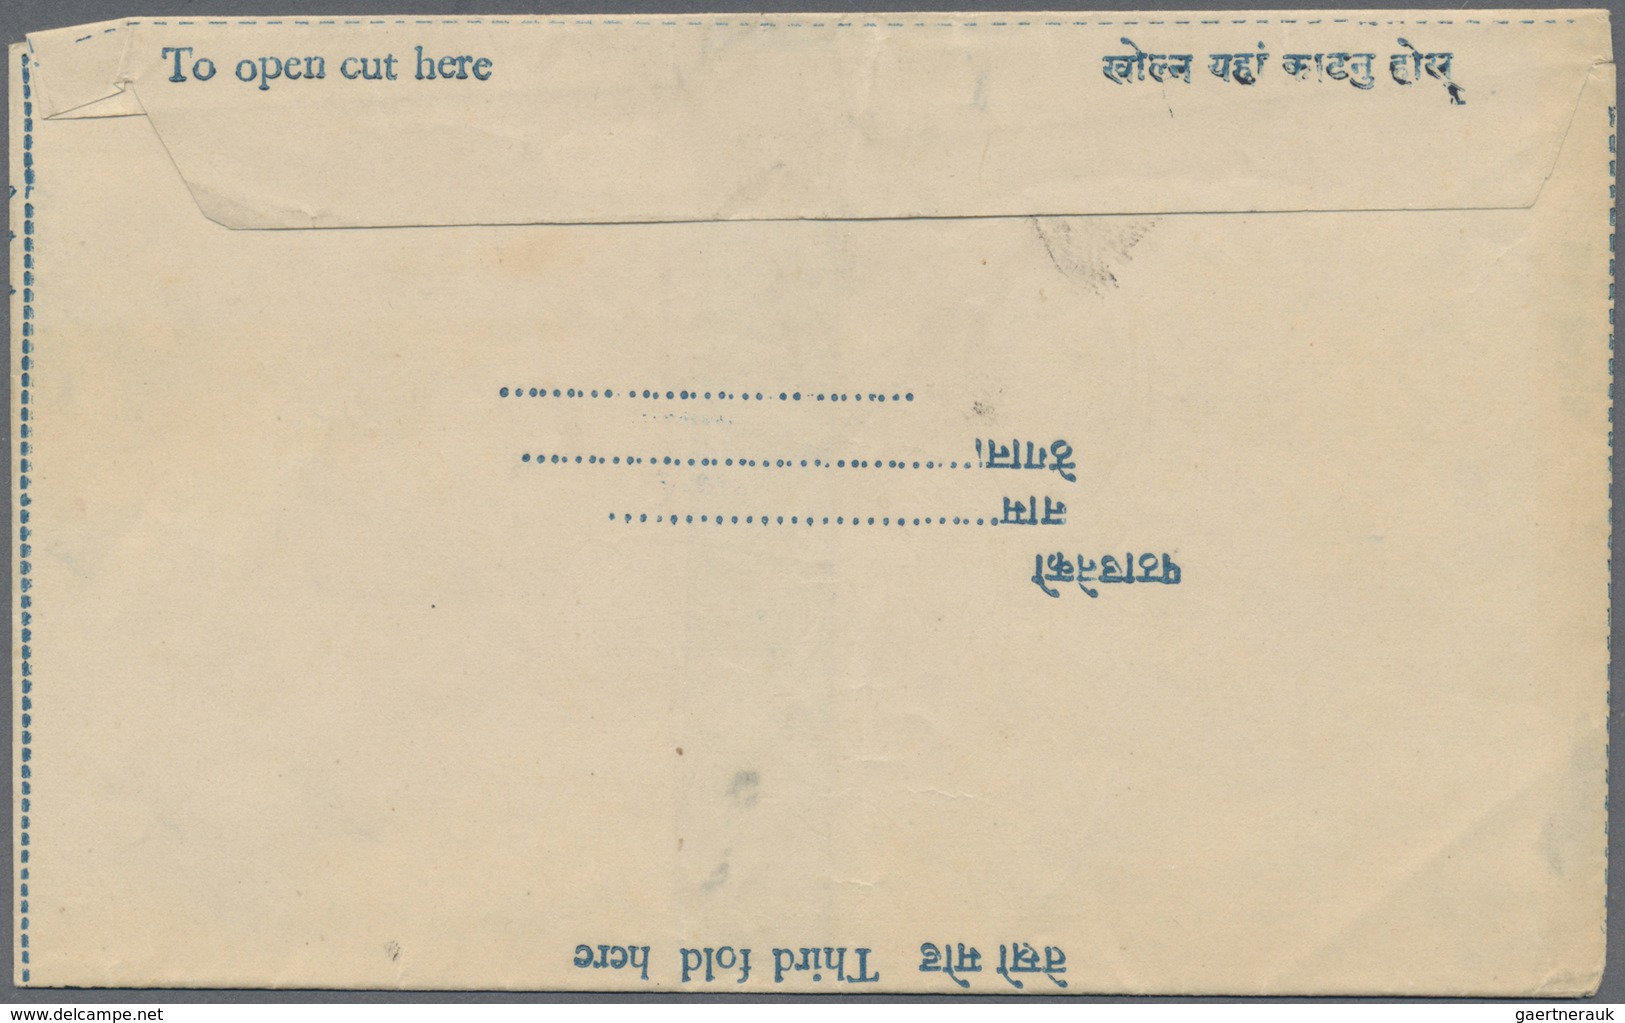 GA Nepal: 1959 Five Aerogrammes 8p. blue, Type 1 (without corner ornaments), all different in Wmk, one